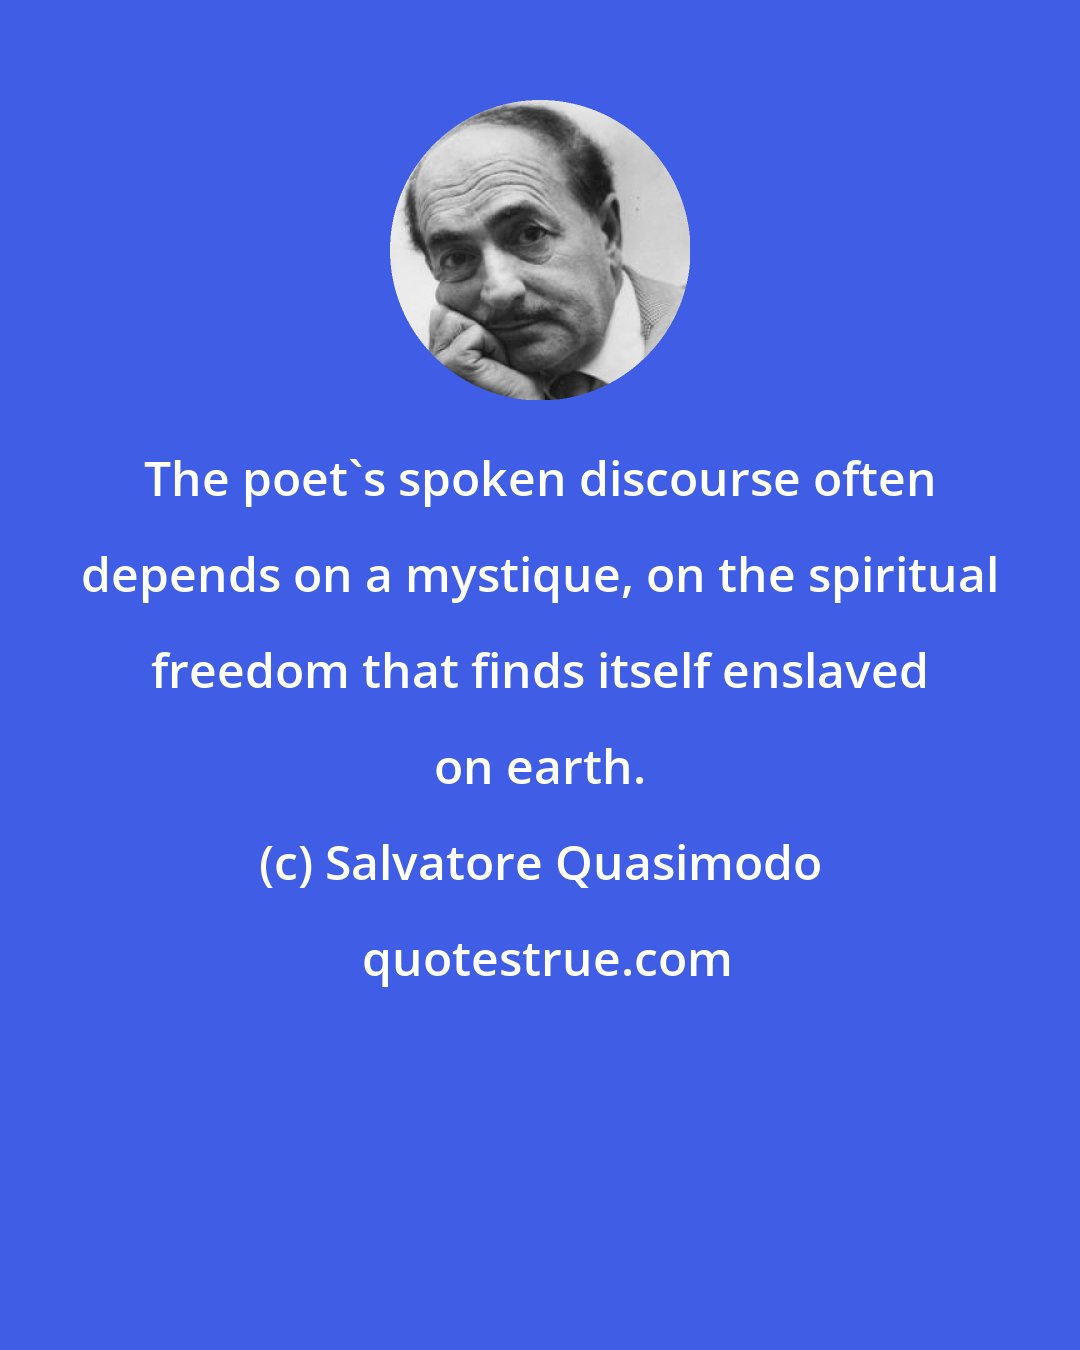 Salvatore Quasimodo: The poet's spoken discourse often depends on a mystique, on the spiritual freedom that finds itself enslaved on earth.